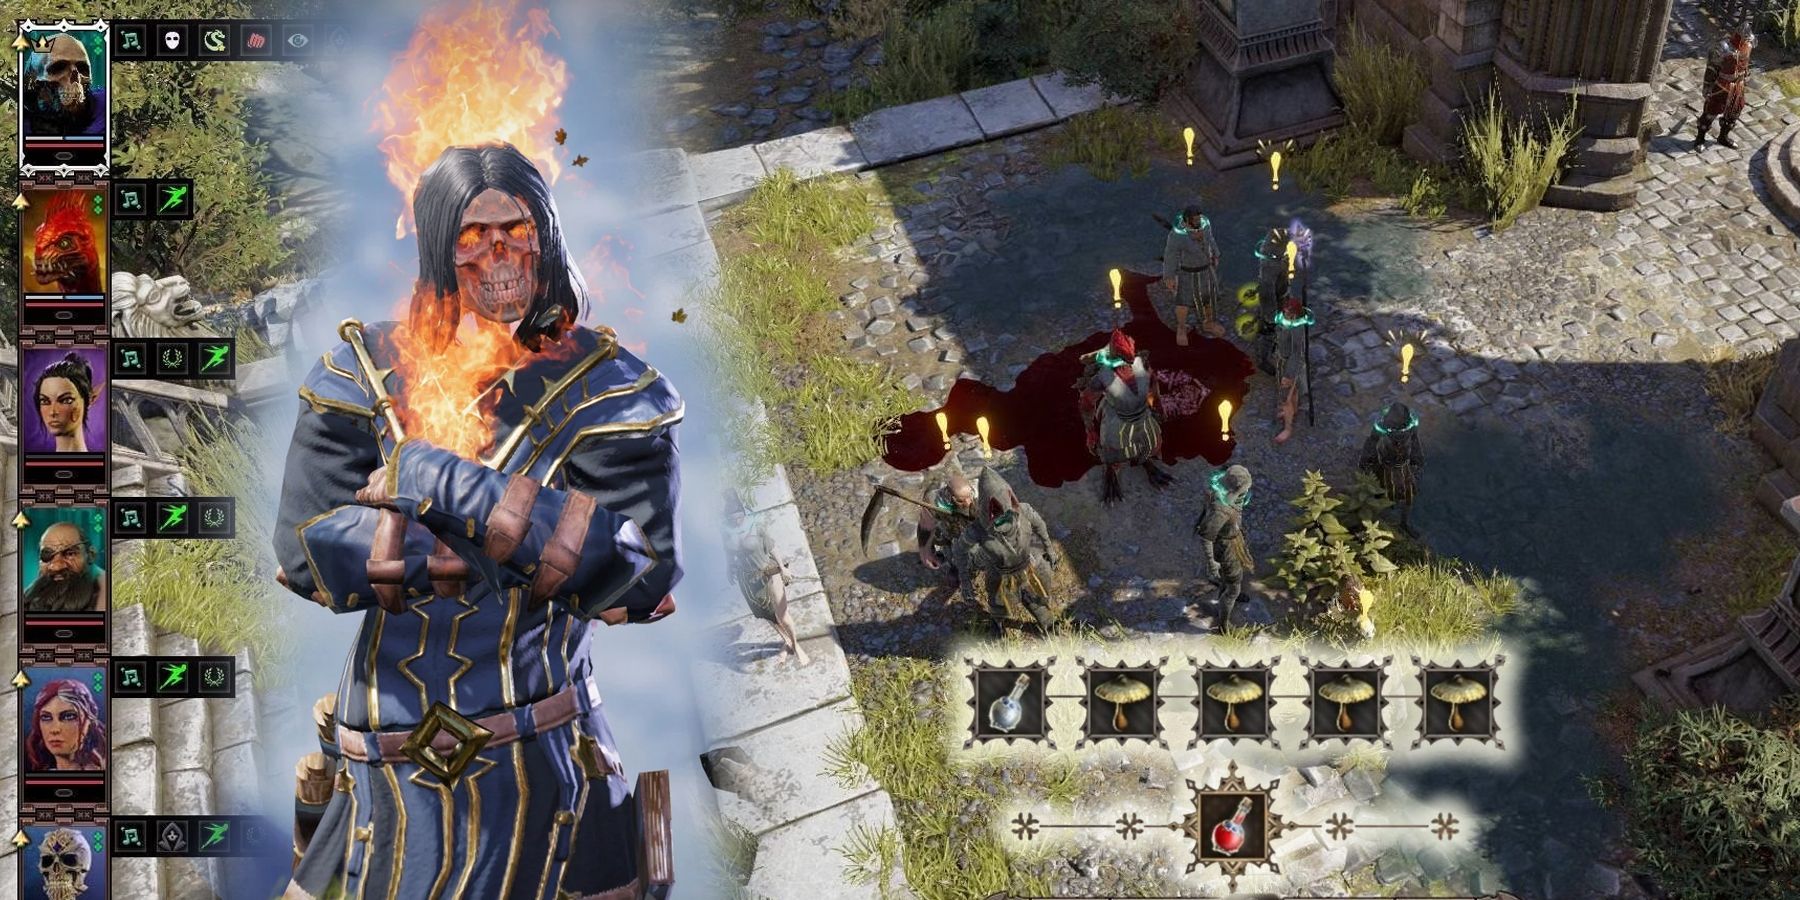 A flaming skeleton and a turn based battle in Divinity: Original Sin 2